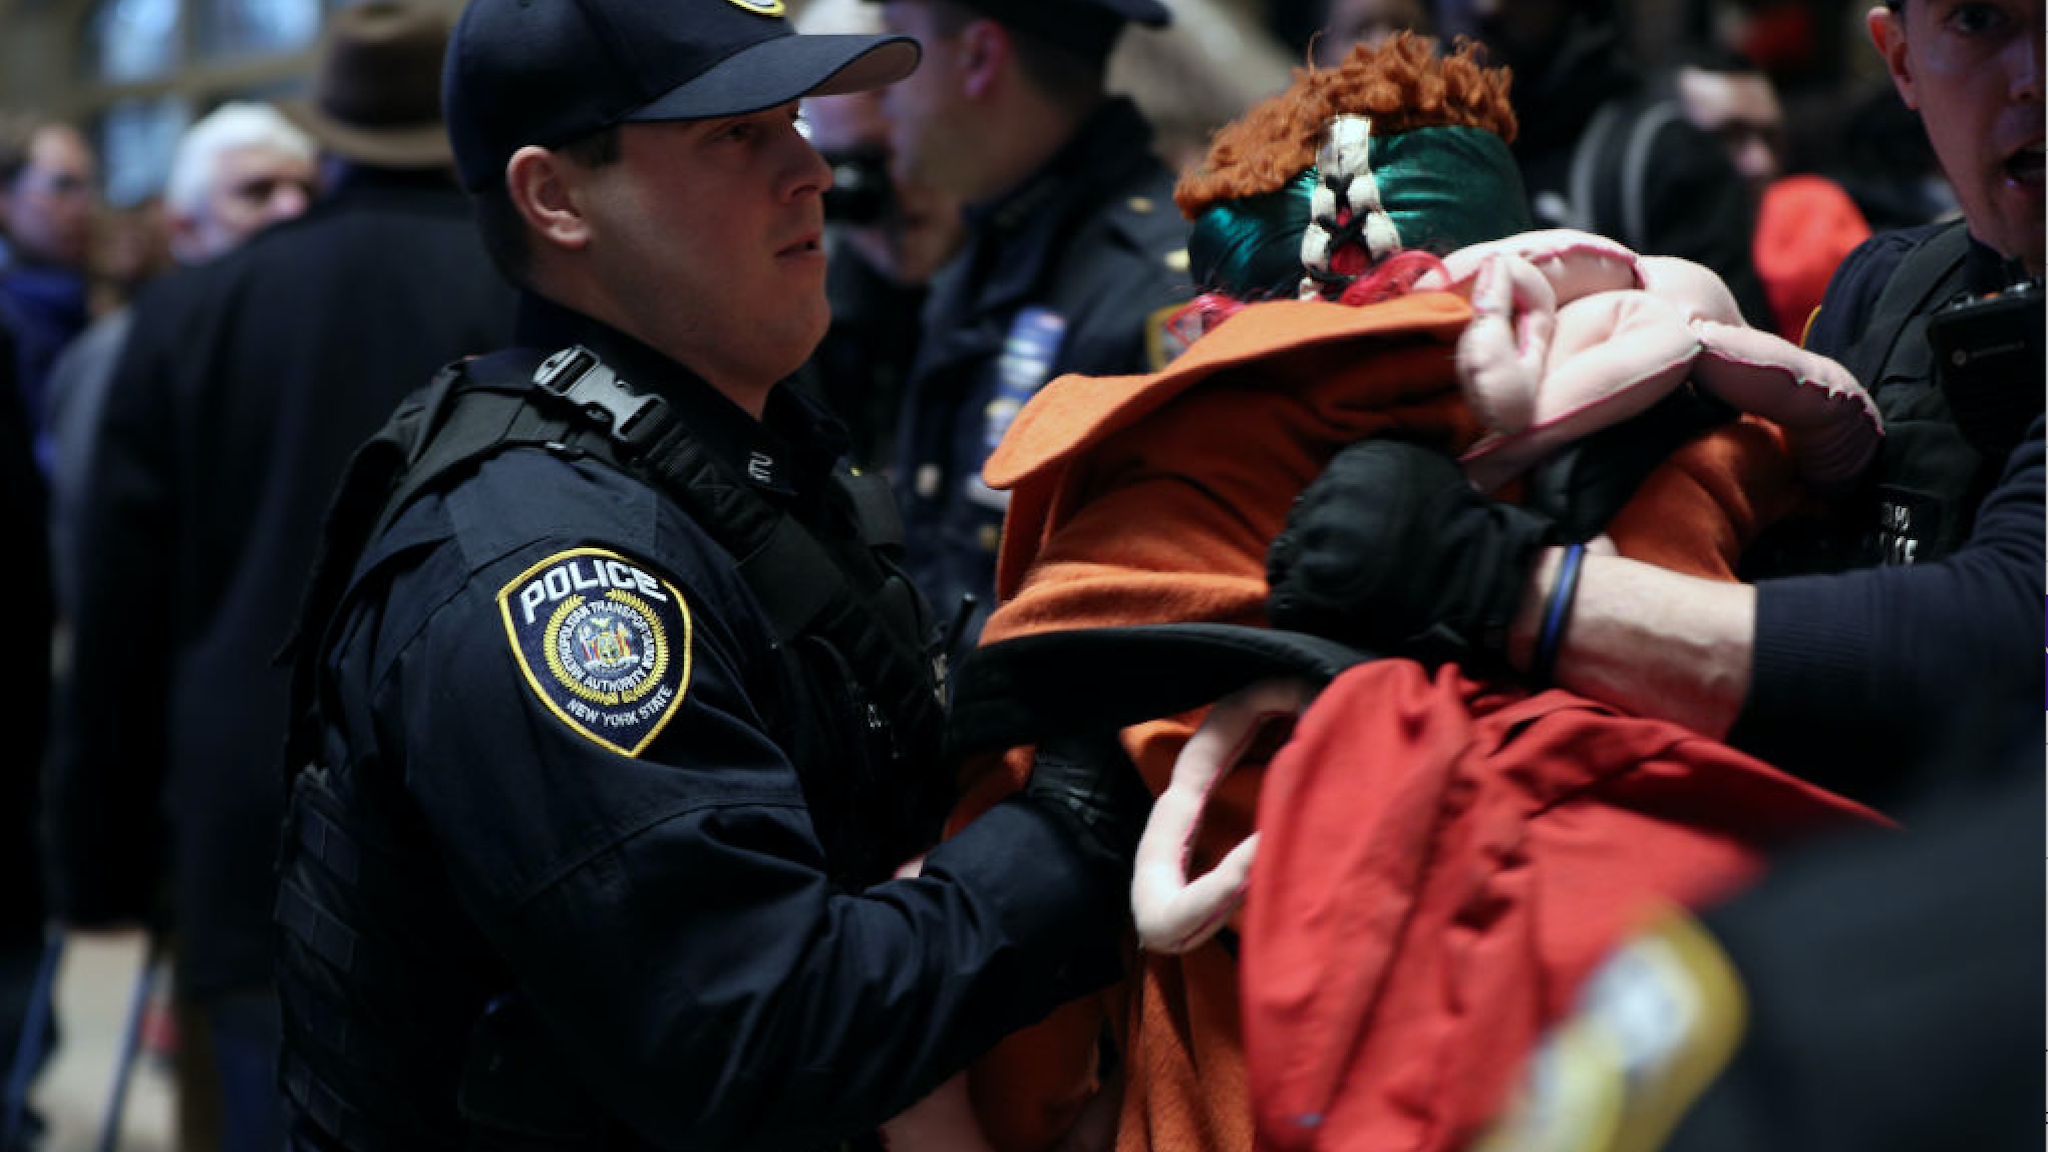 Thousands of protesters flocked to Grand Central Terminal and flowed out into Midtown's streets during rush hour Friday to protest increased policing and rising fares in New York City's subways at Grand Central Terminal in New York on January 31, 2020.